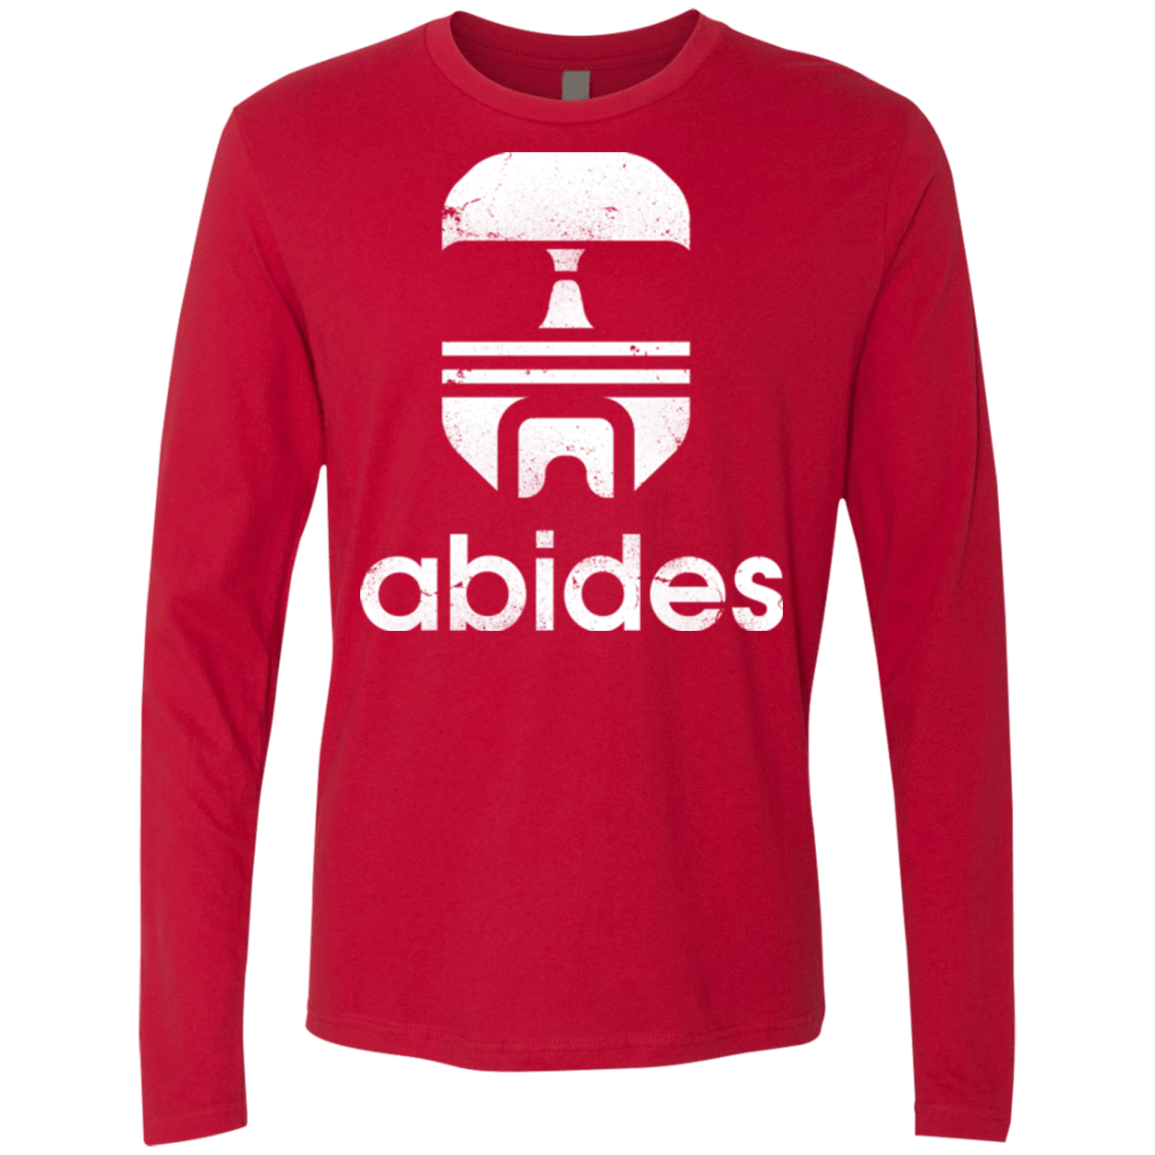 T-Shirts Red / Small Abides Men's Premium Long Sleeve